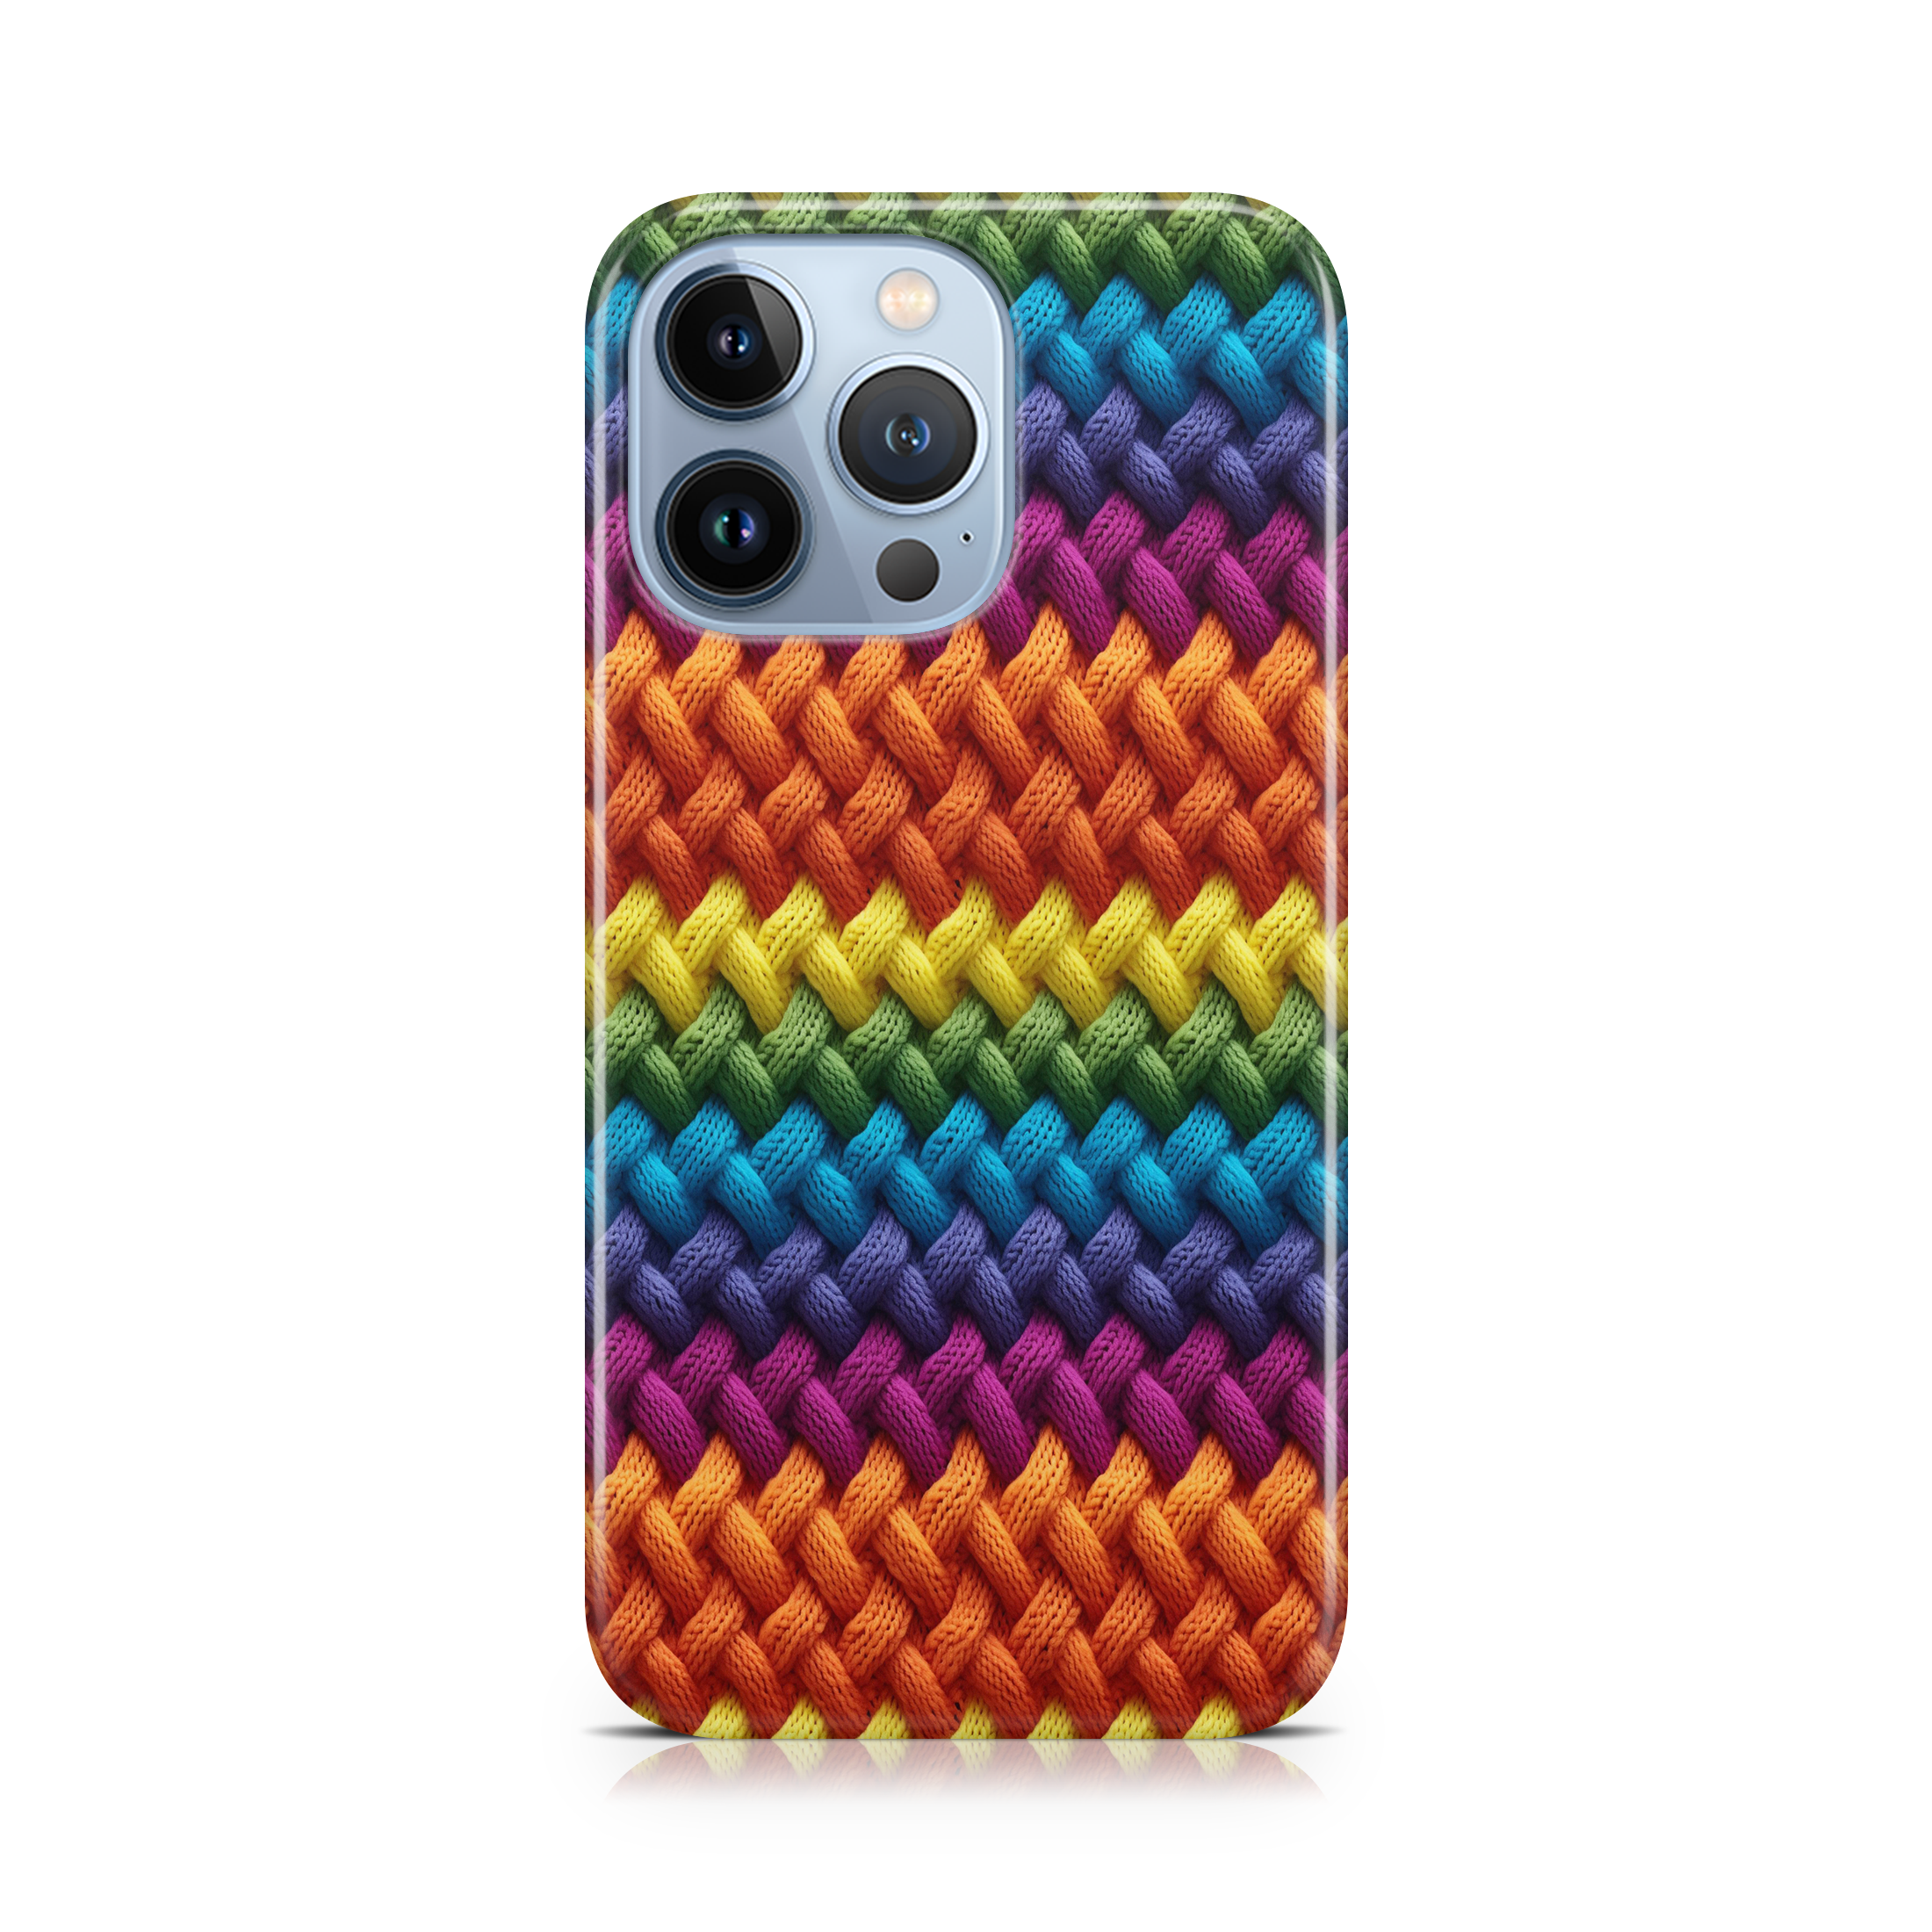 Rainbow Stitches - iPhone phone case designs by CaseSwagger